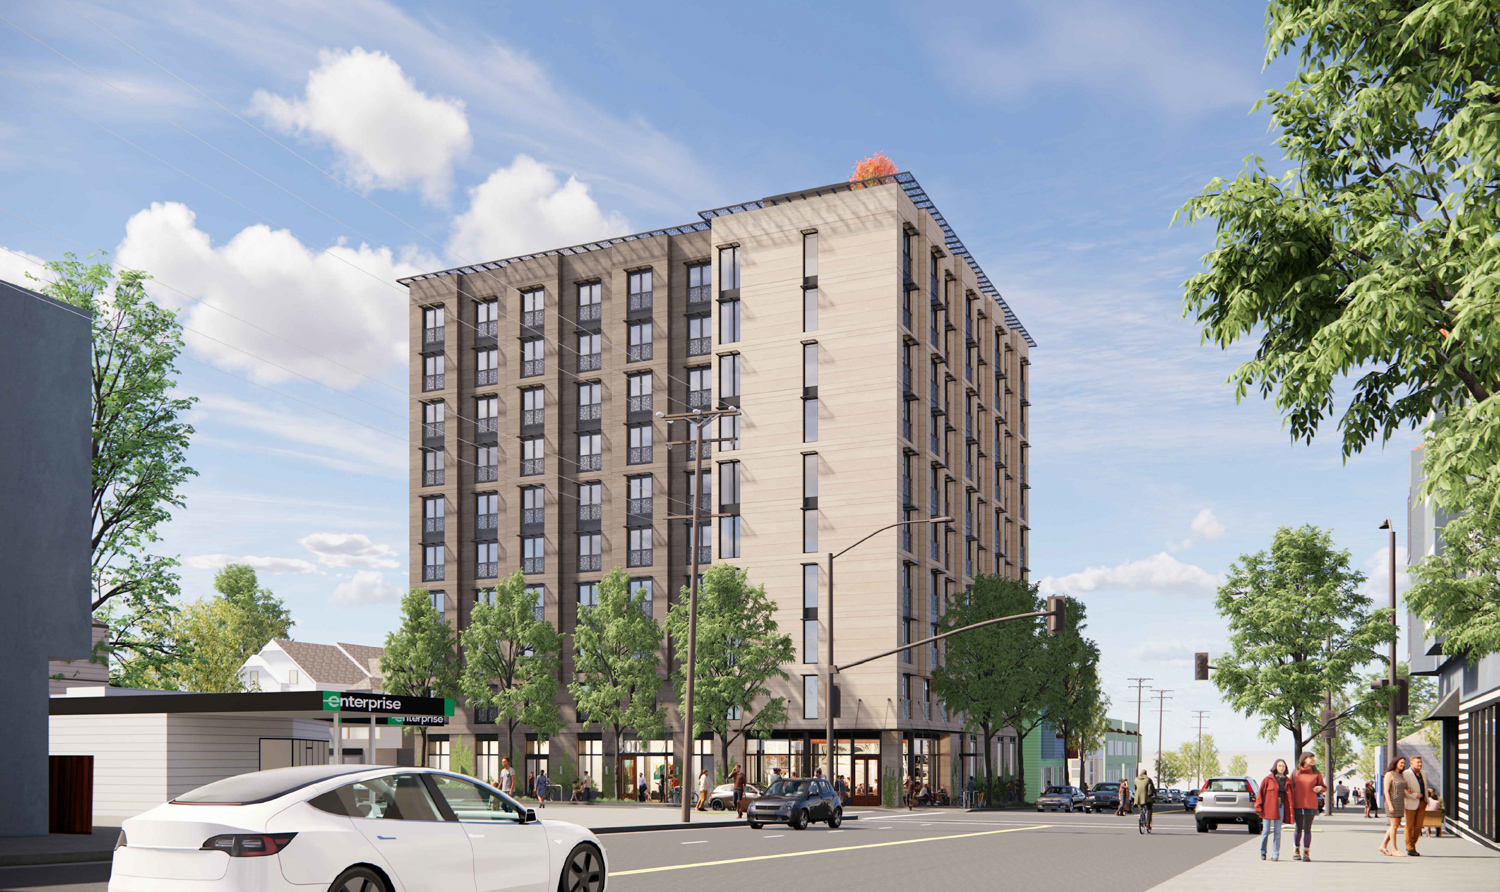 3000 Shattuck Avenue view along Ashby, rendering by Trachtenberg Architects